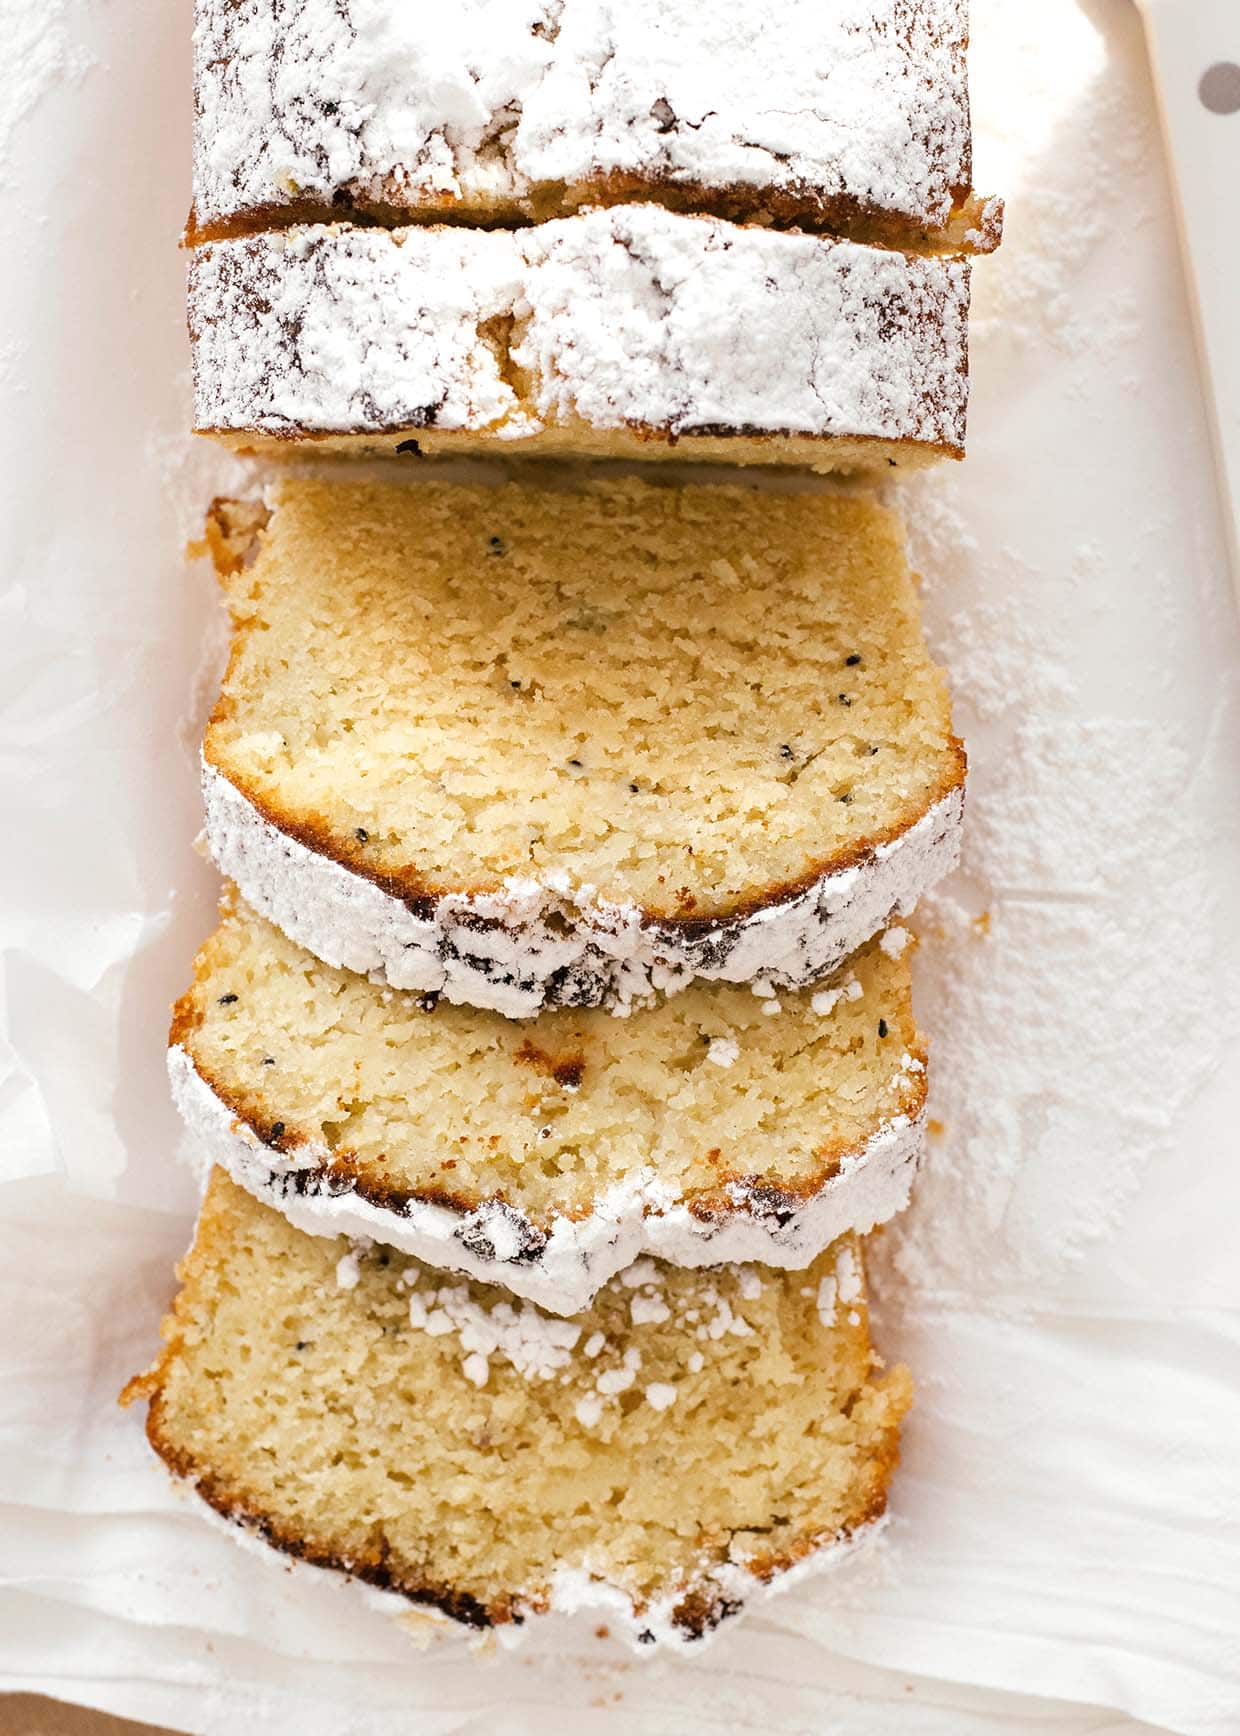 slices of pound cake dusted with powdered sugar